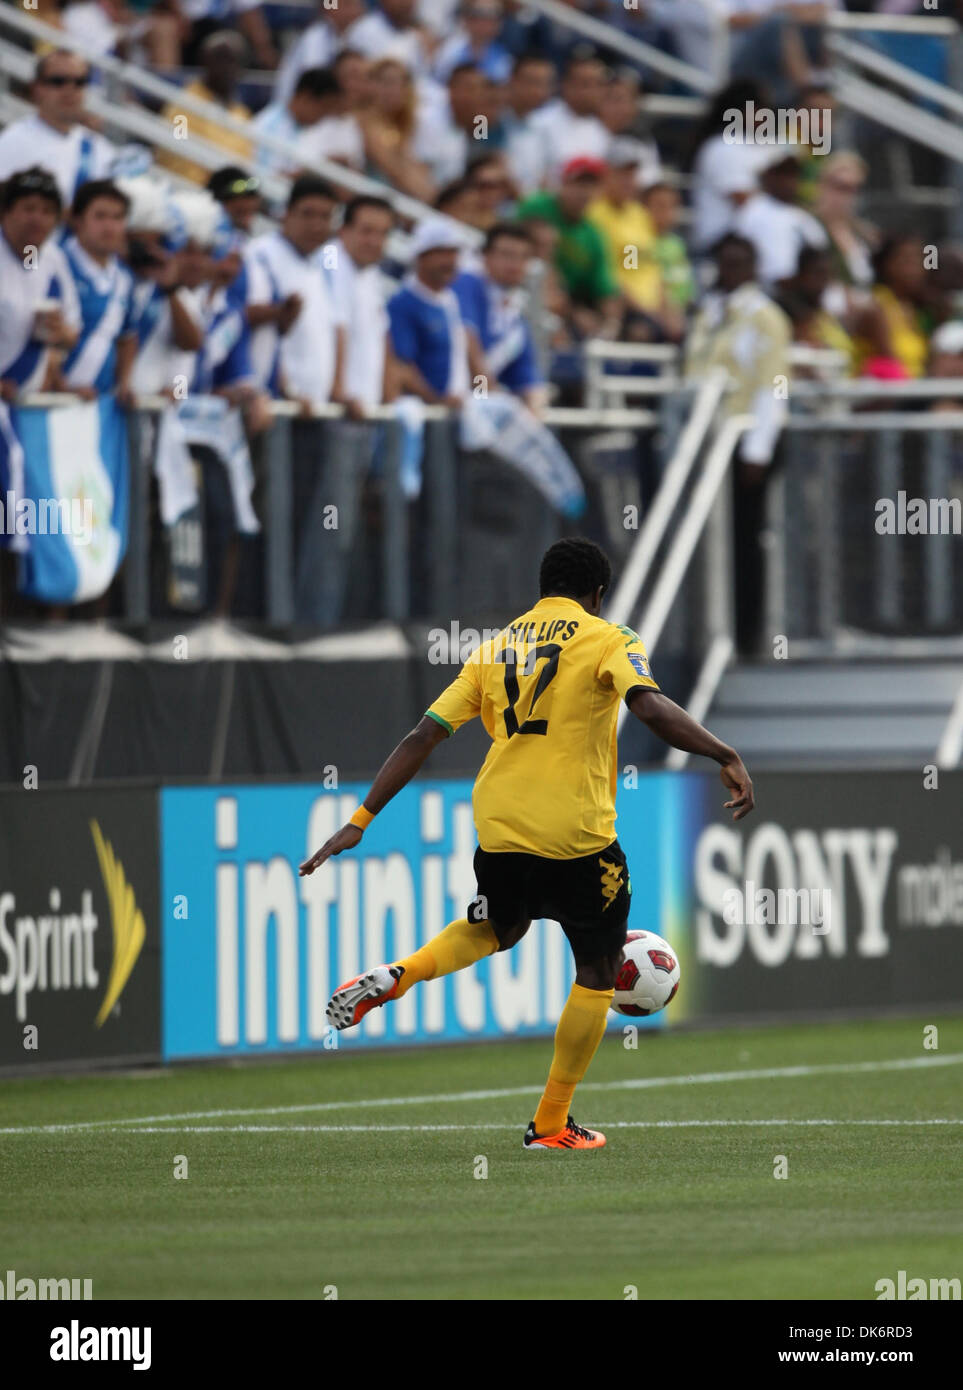 June 10, 2011 - Miami, Florida, U.S - Jamaica midfielder Demar Phillips #12in action during the 2011 CONCACAF Gold Cup game between Jamaica and Guatemala at FIU Stadium in Miami, Florida. (Credit Image: © Luis Blanco/Southcreek Global/ZUMApress.com) Stock Photo